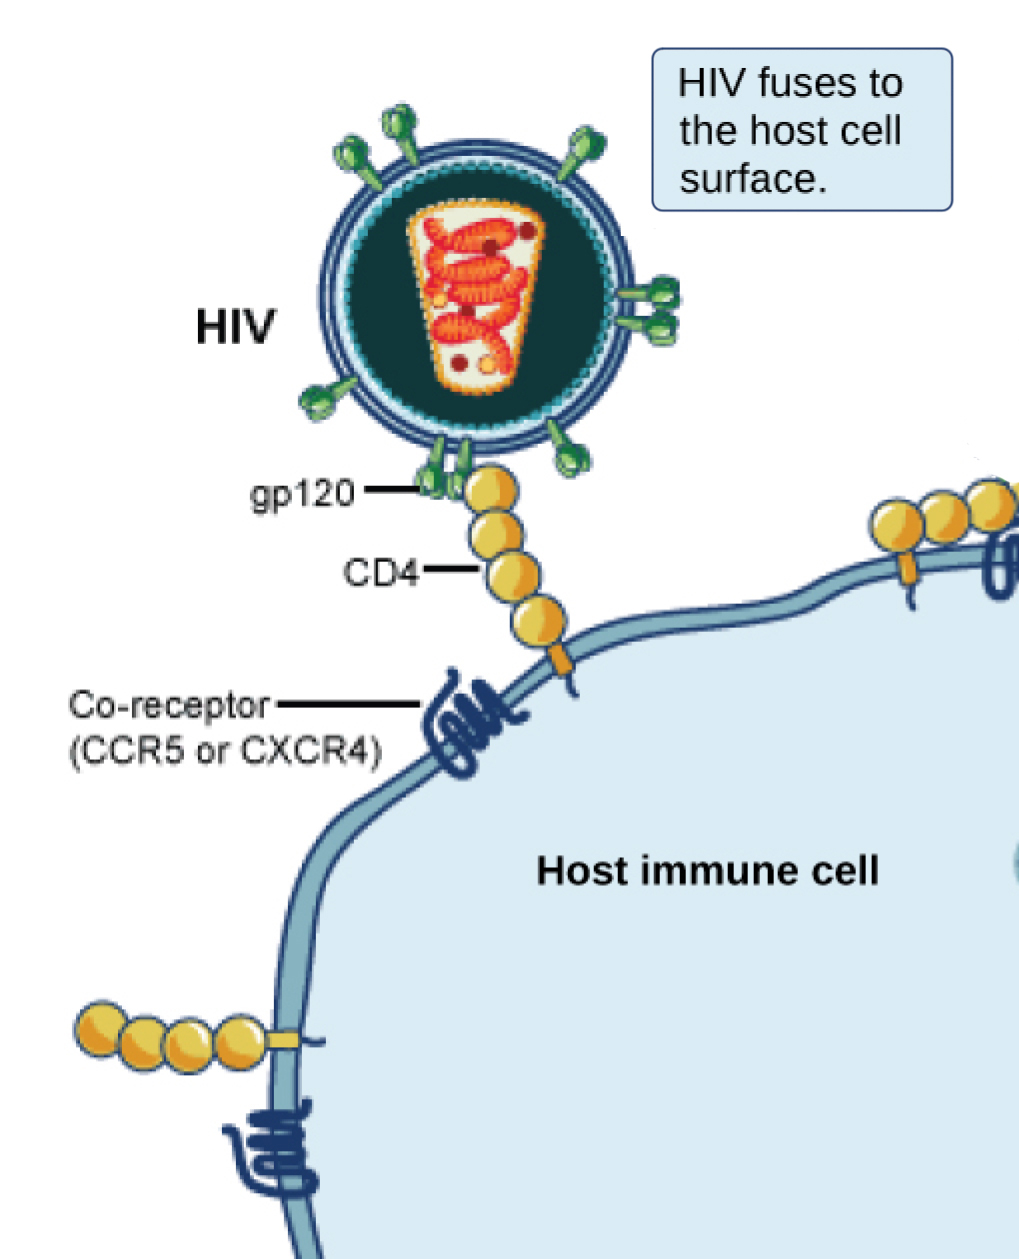 In the illustration a viral receptor on the surface of an HIV virus is attaches to a co-receptor embedded in the plasma membrane. The co-receptor is either CCR5 or CXCR4.